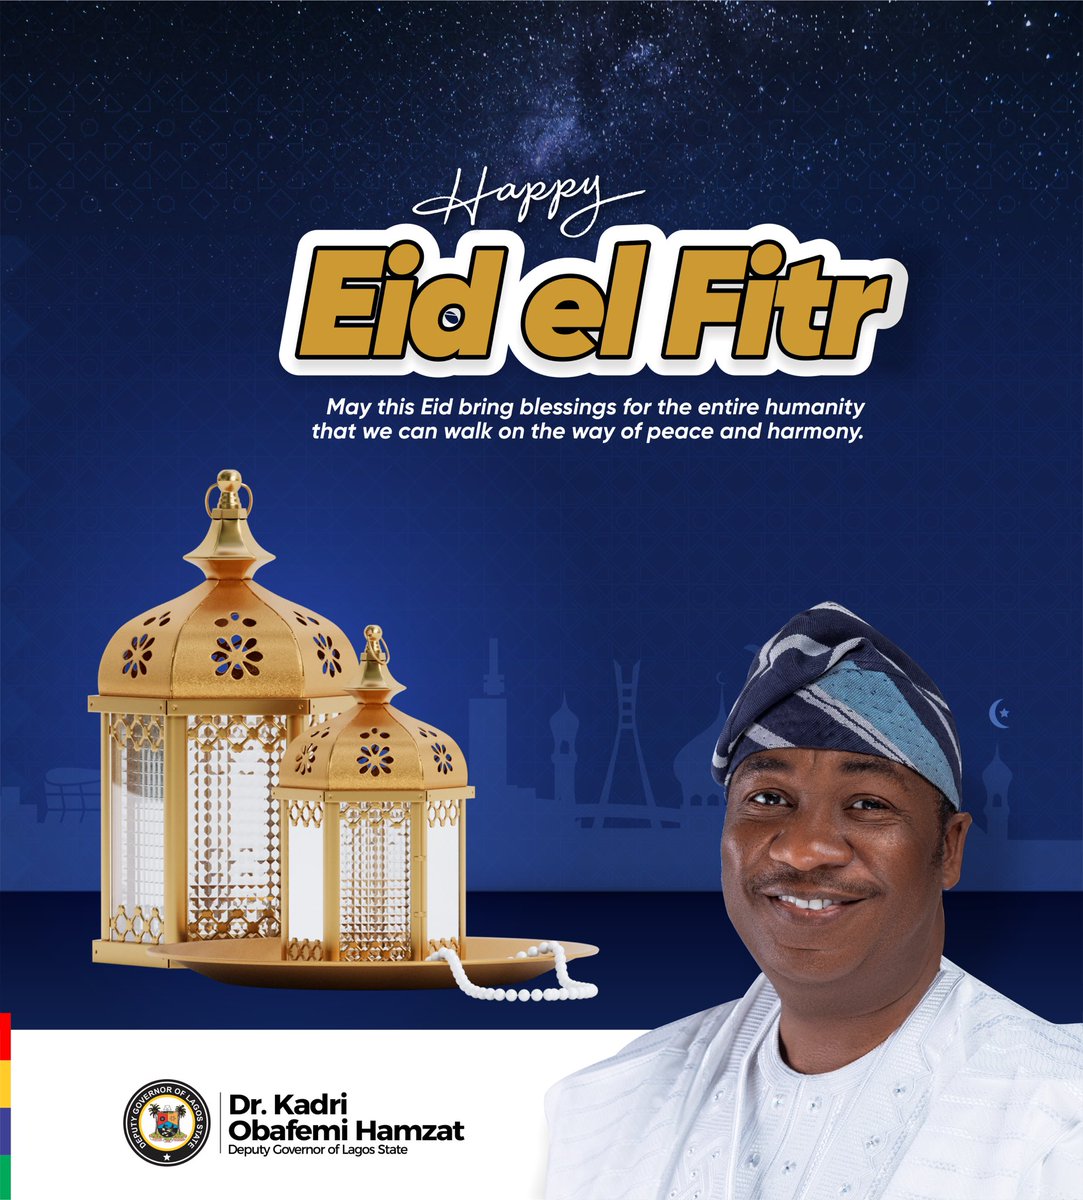 As we celebrate the joyous occasion of Eid el-Fitr today, I extend my warmest wishes to all Muslim residents of our state. This day marks the end of the holy month of Ramadan, a time of spiritual reflection, self-discipline, and acts of generosity. It is a time for us all to…